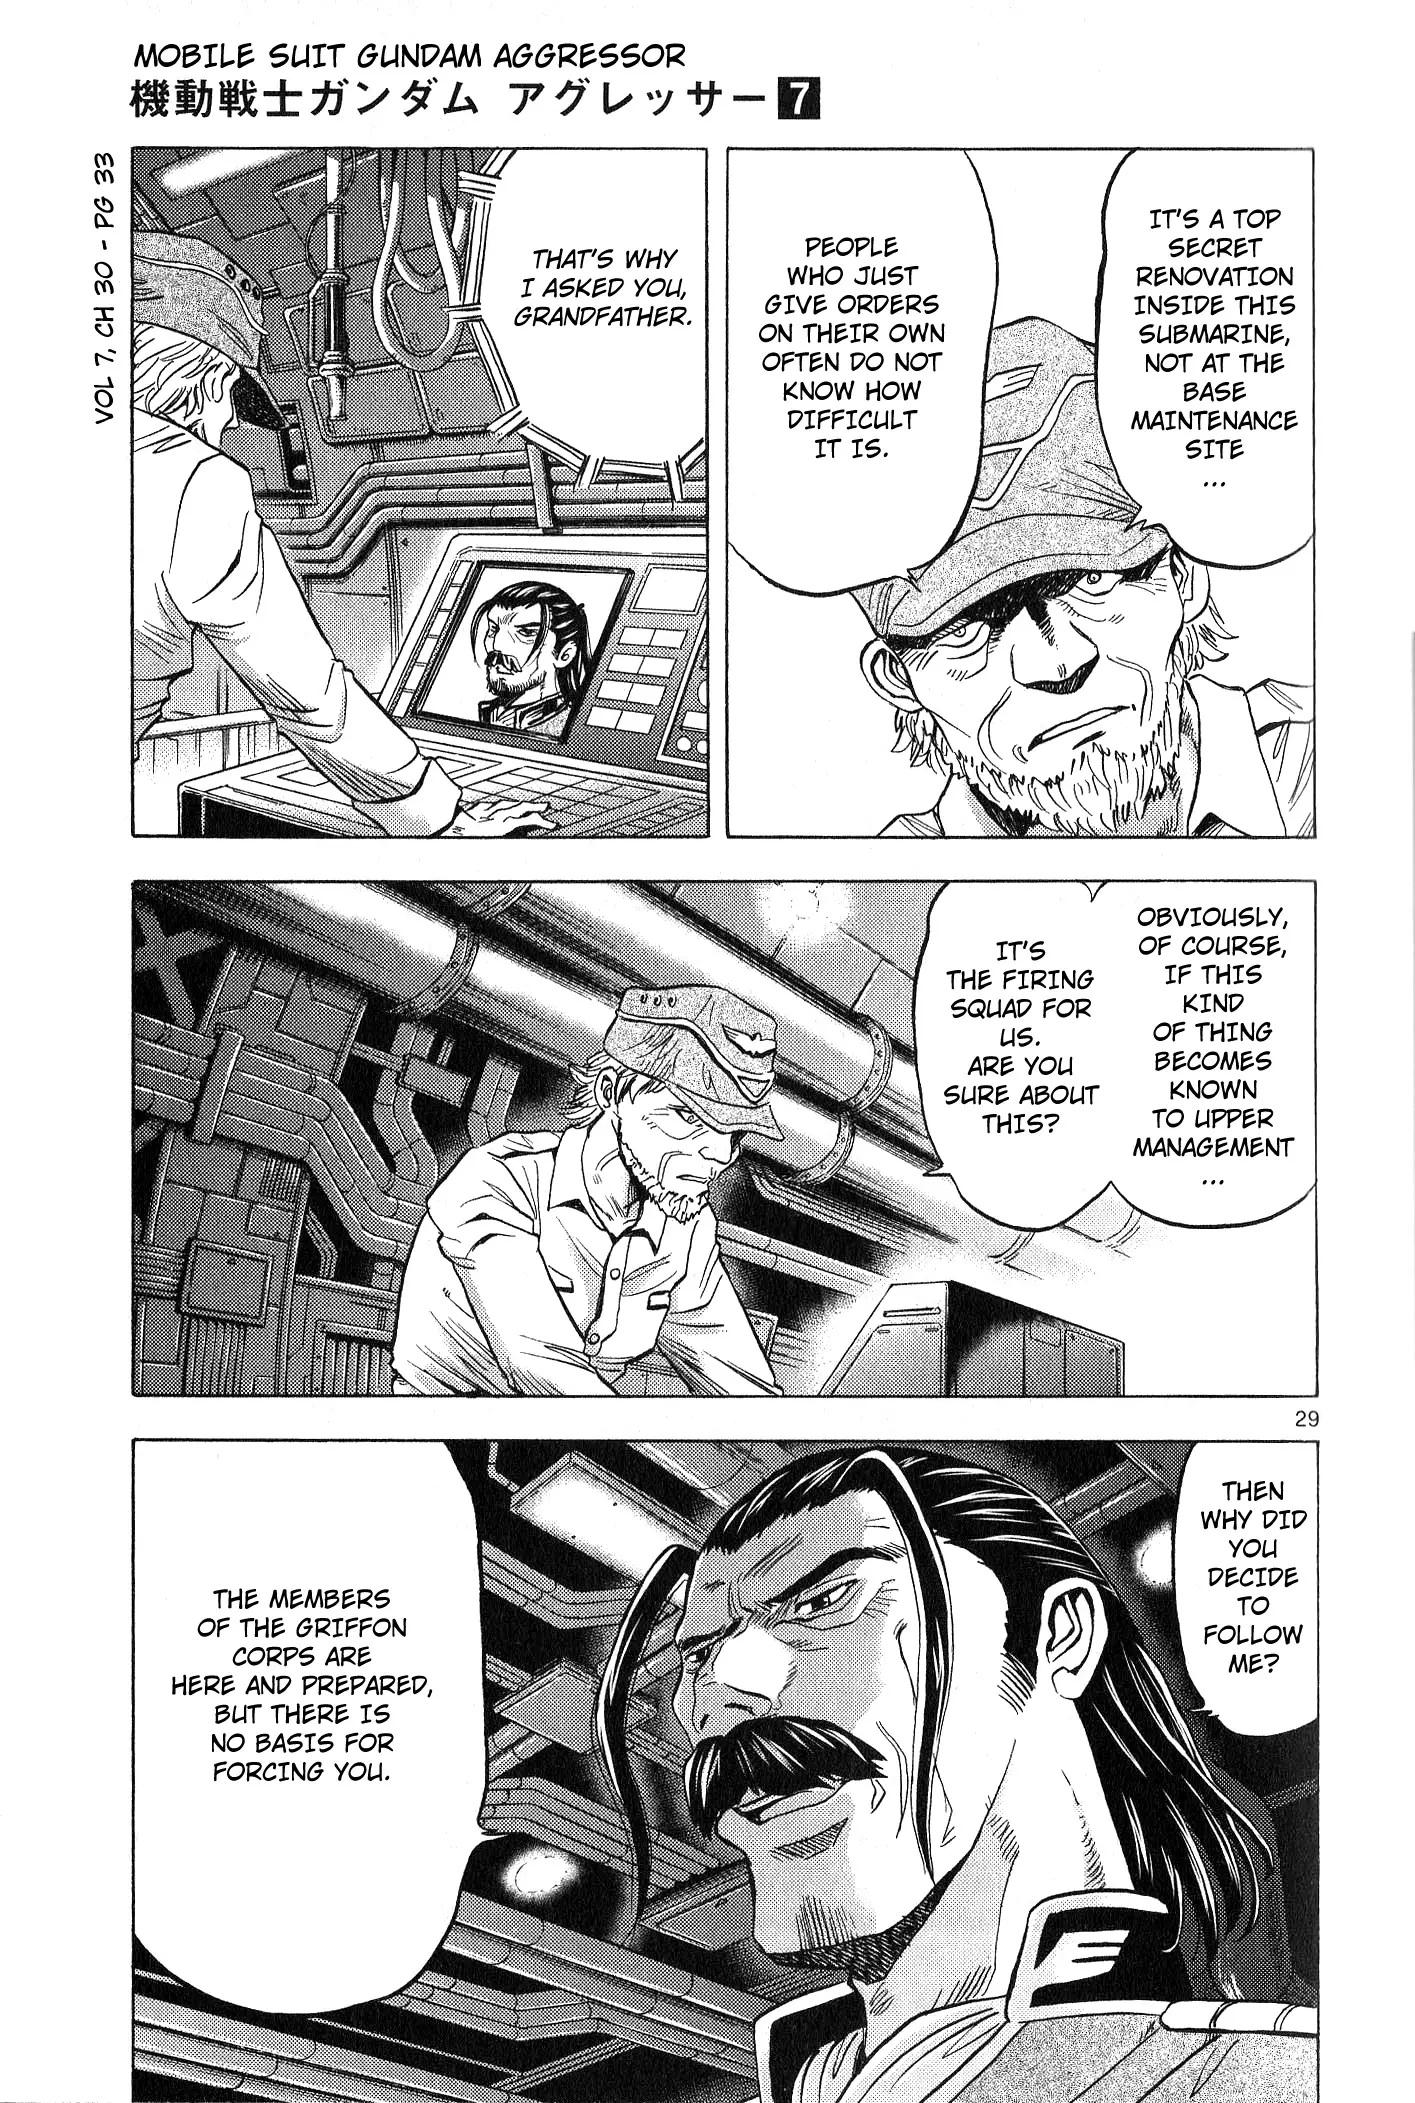 Mobile Suit Gundam Aggressor - 30 page 28-ccc3a6f5